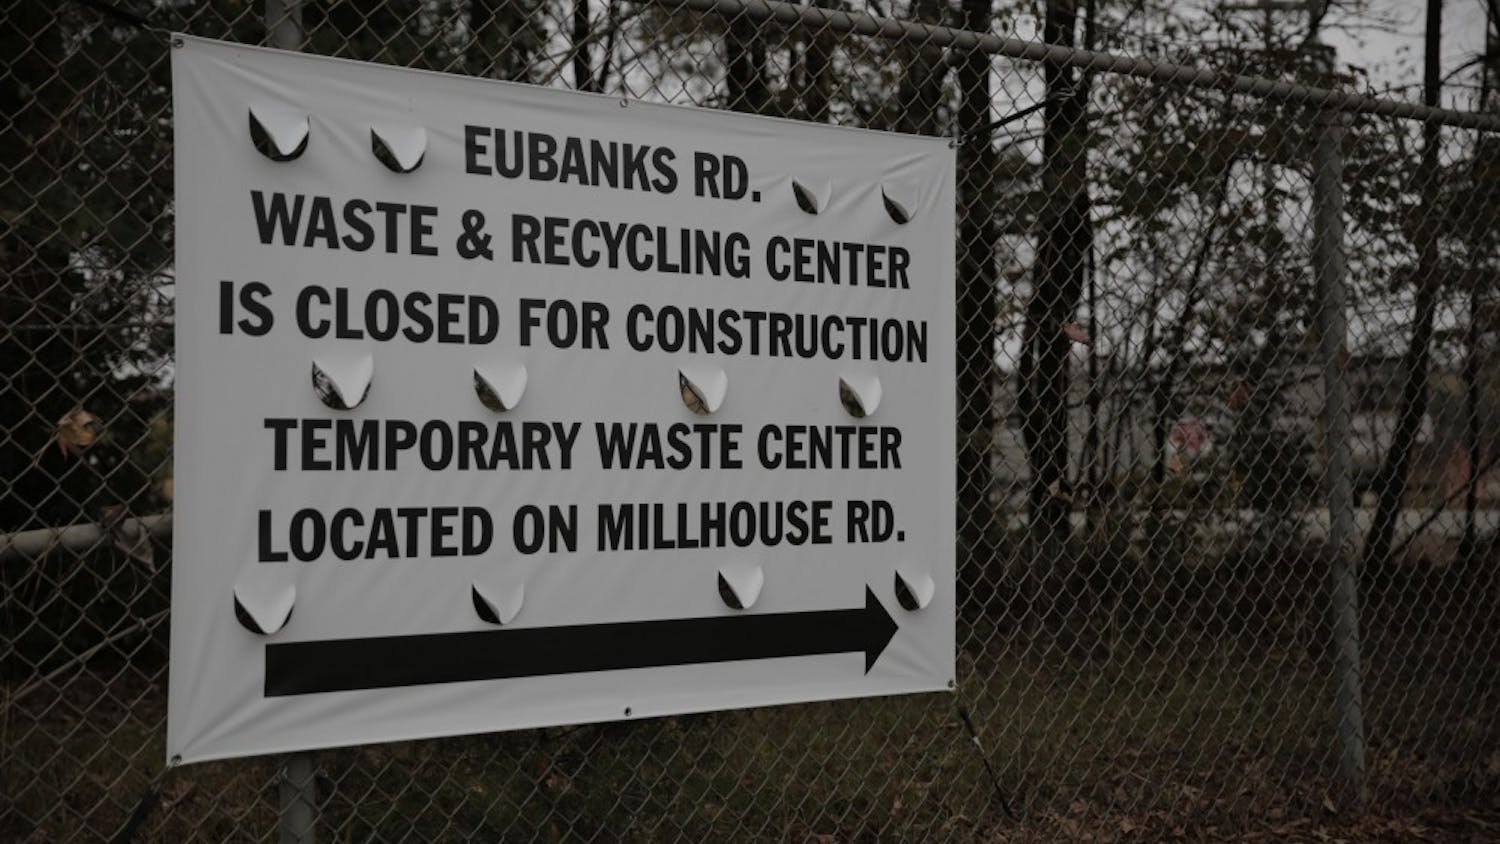 Construction&nbsp;activities&nbsp;to remodel, expand and&nbsp;make improvements at the Eubanks Rd. Waste and Recycling Center are estimated to last ten months.